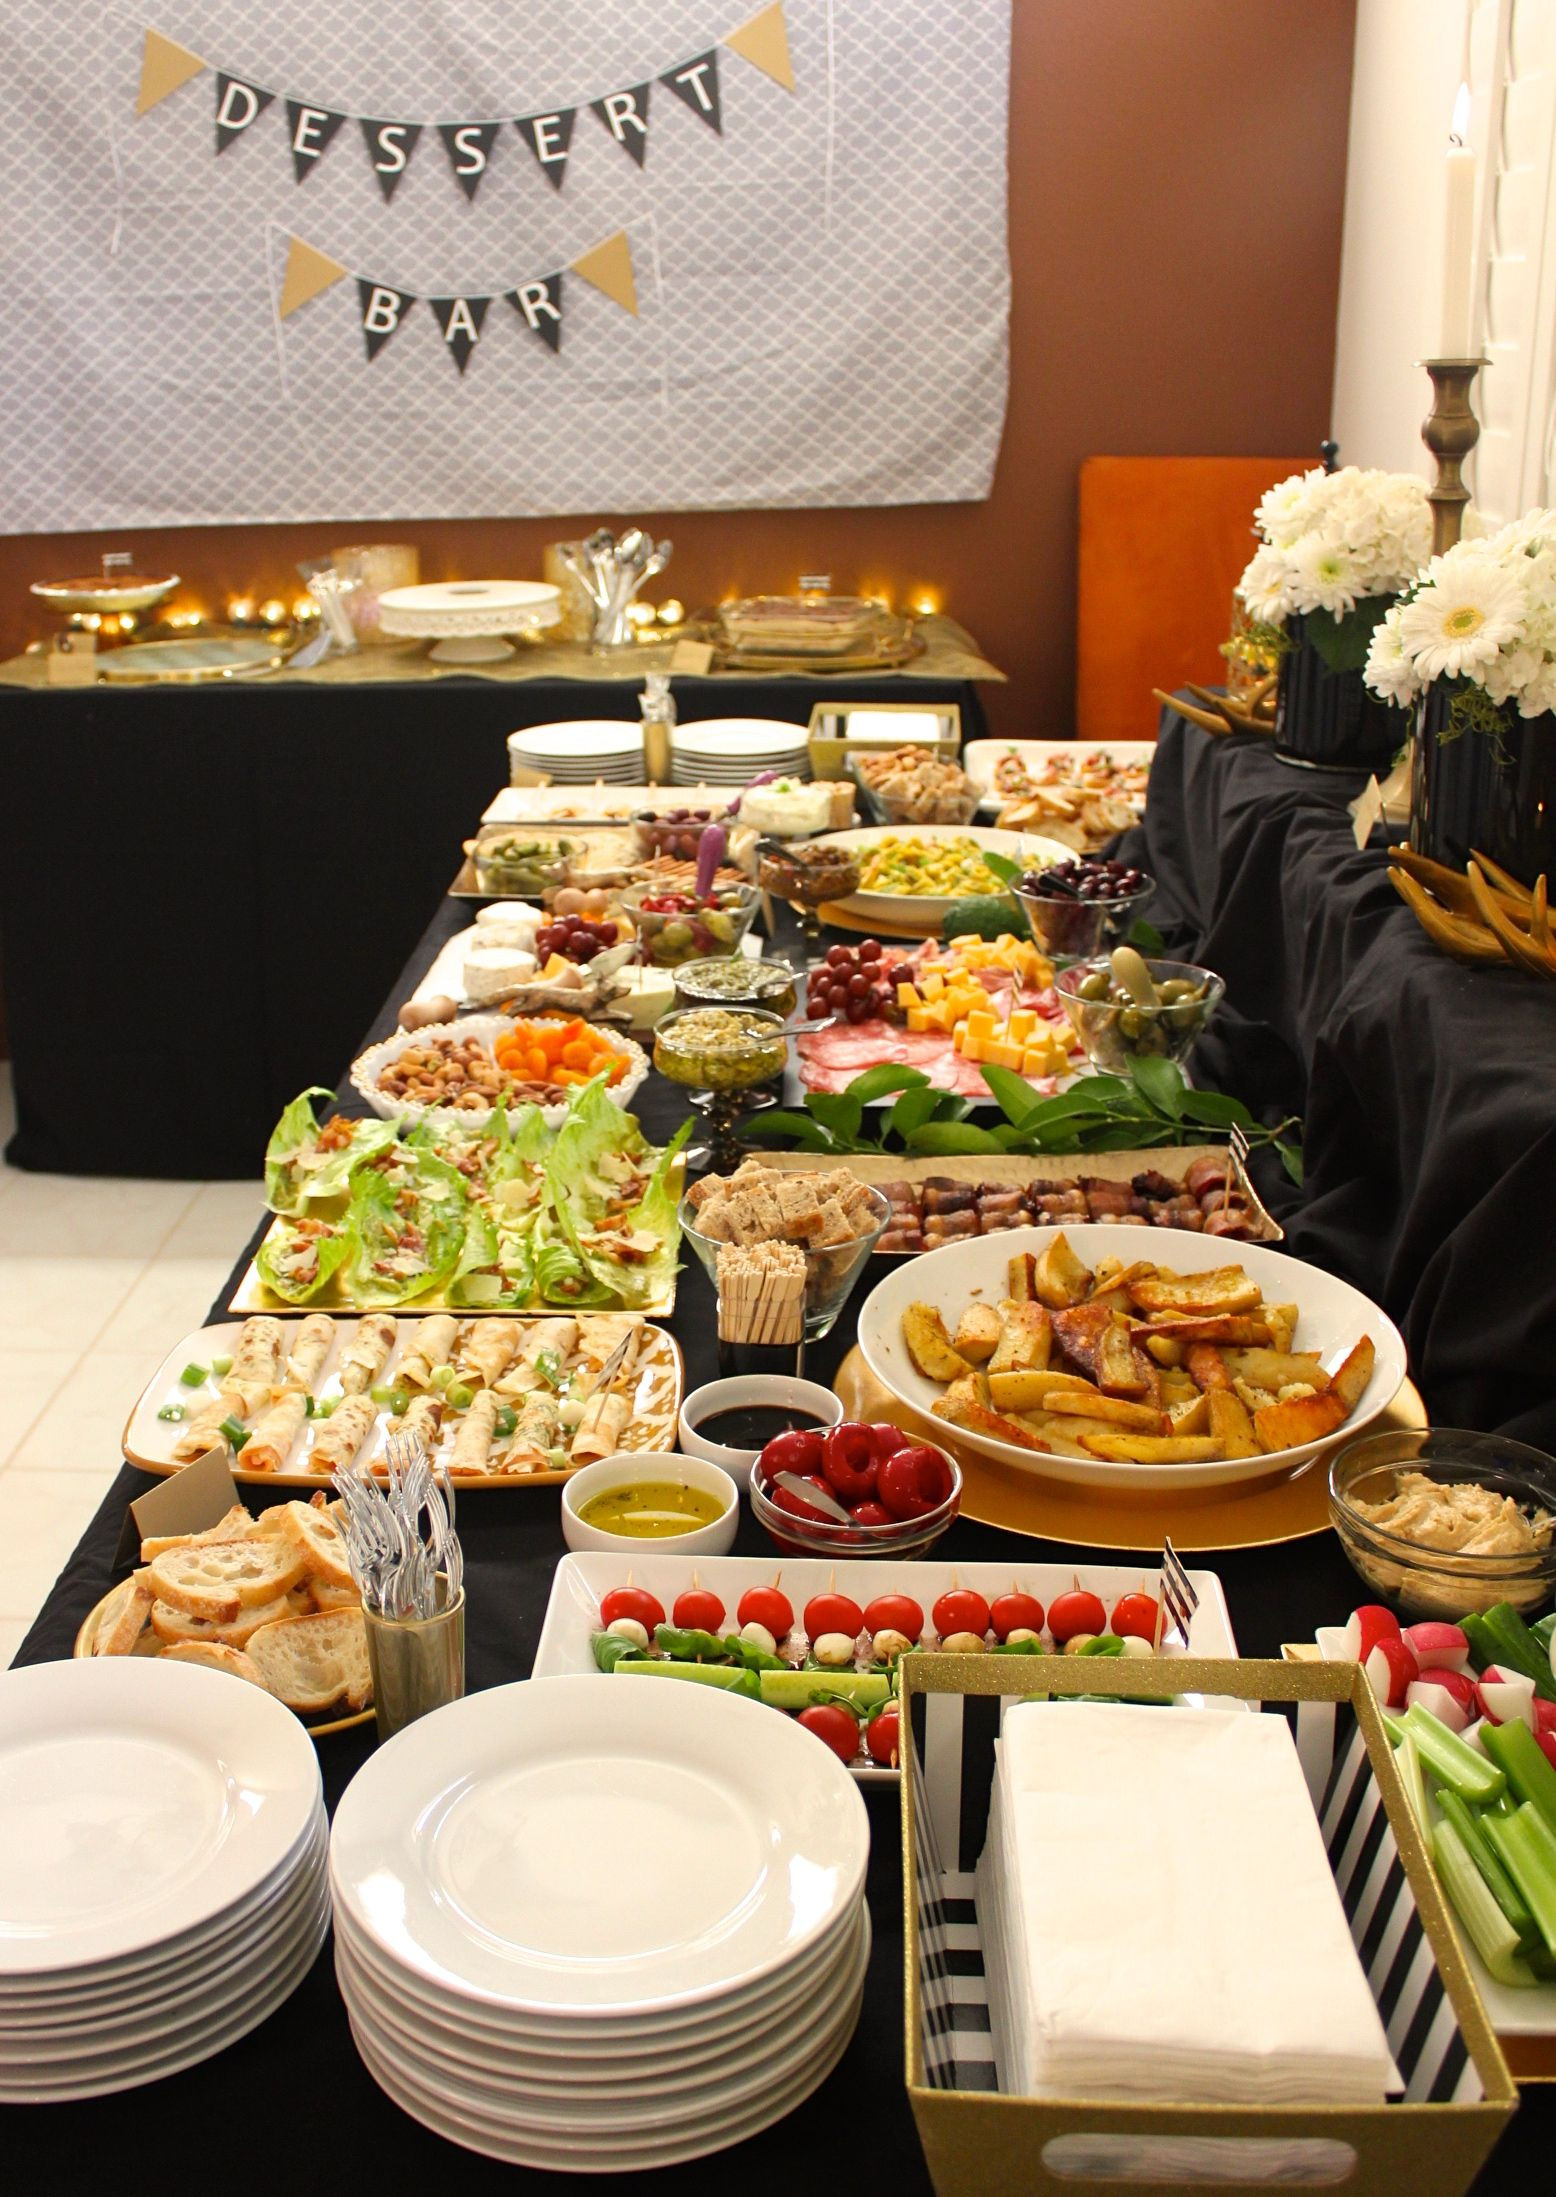 Graduation Party Setup Ideas
 Event Catering Buffet food set up Heavy Appetizers